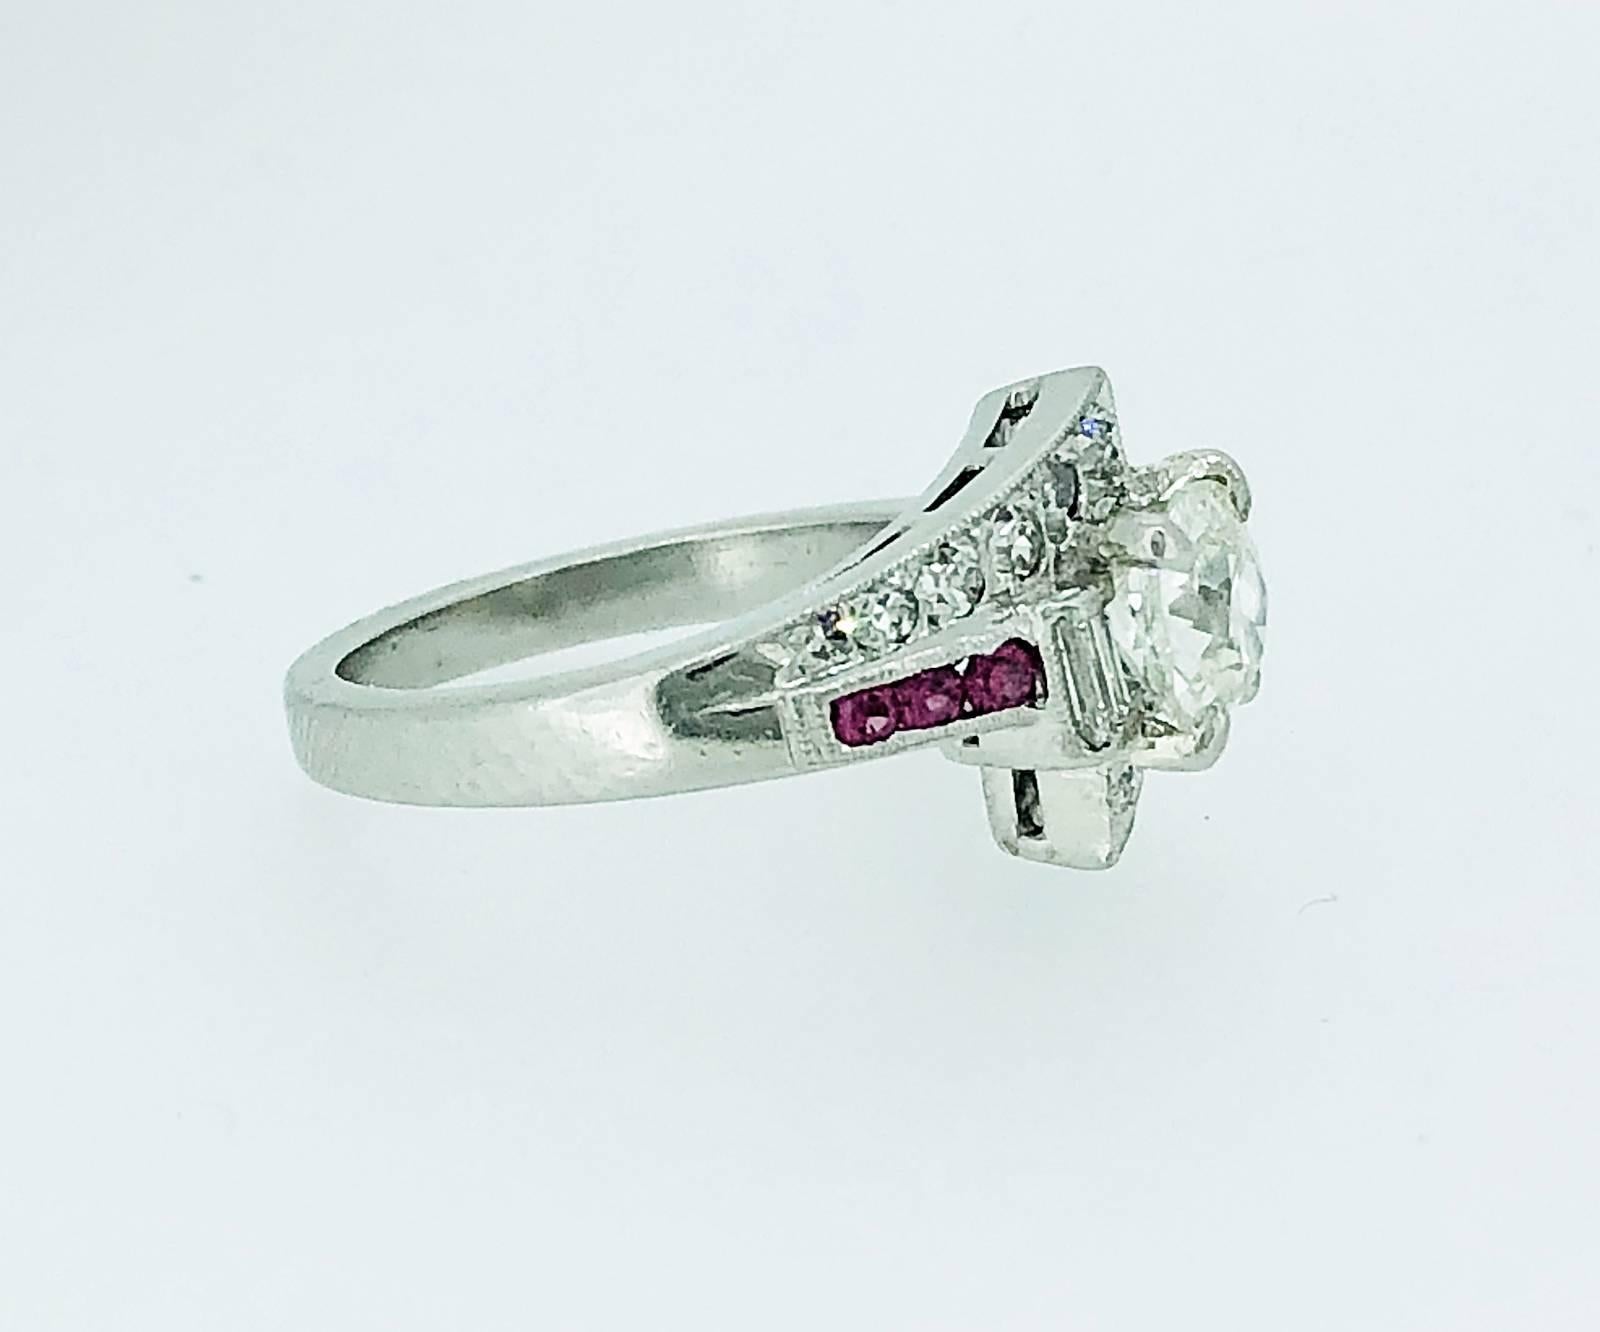 A fabulous Art Deco diamond and pink sapphire Antique engagement or fashion ring that features a 1.03ct. apx. sparkling European cut diamond with J color and SI1 clarity. Accenting the center diamond are .25ct. apx. T.W. of single cut diamonds with